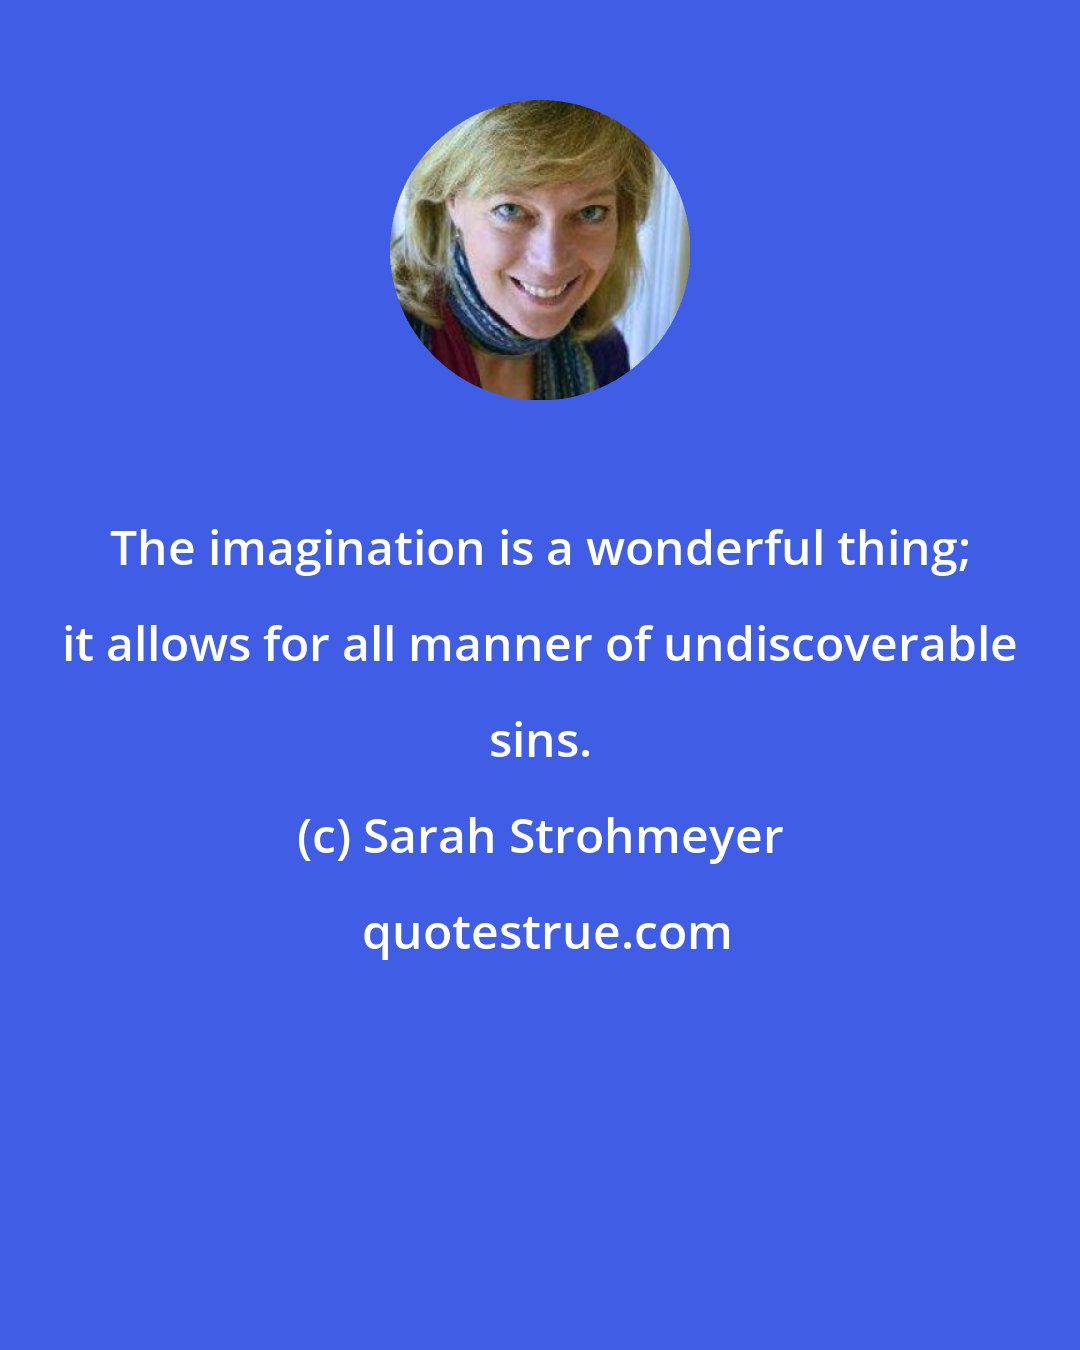 Sarah Strohmeyer: The imagination is a wonderful thing; it allows for all manner of undiscoverable sins.